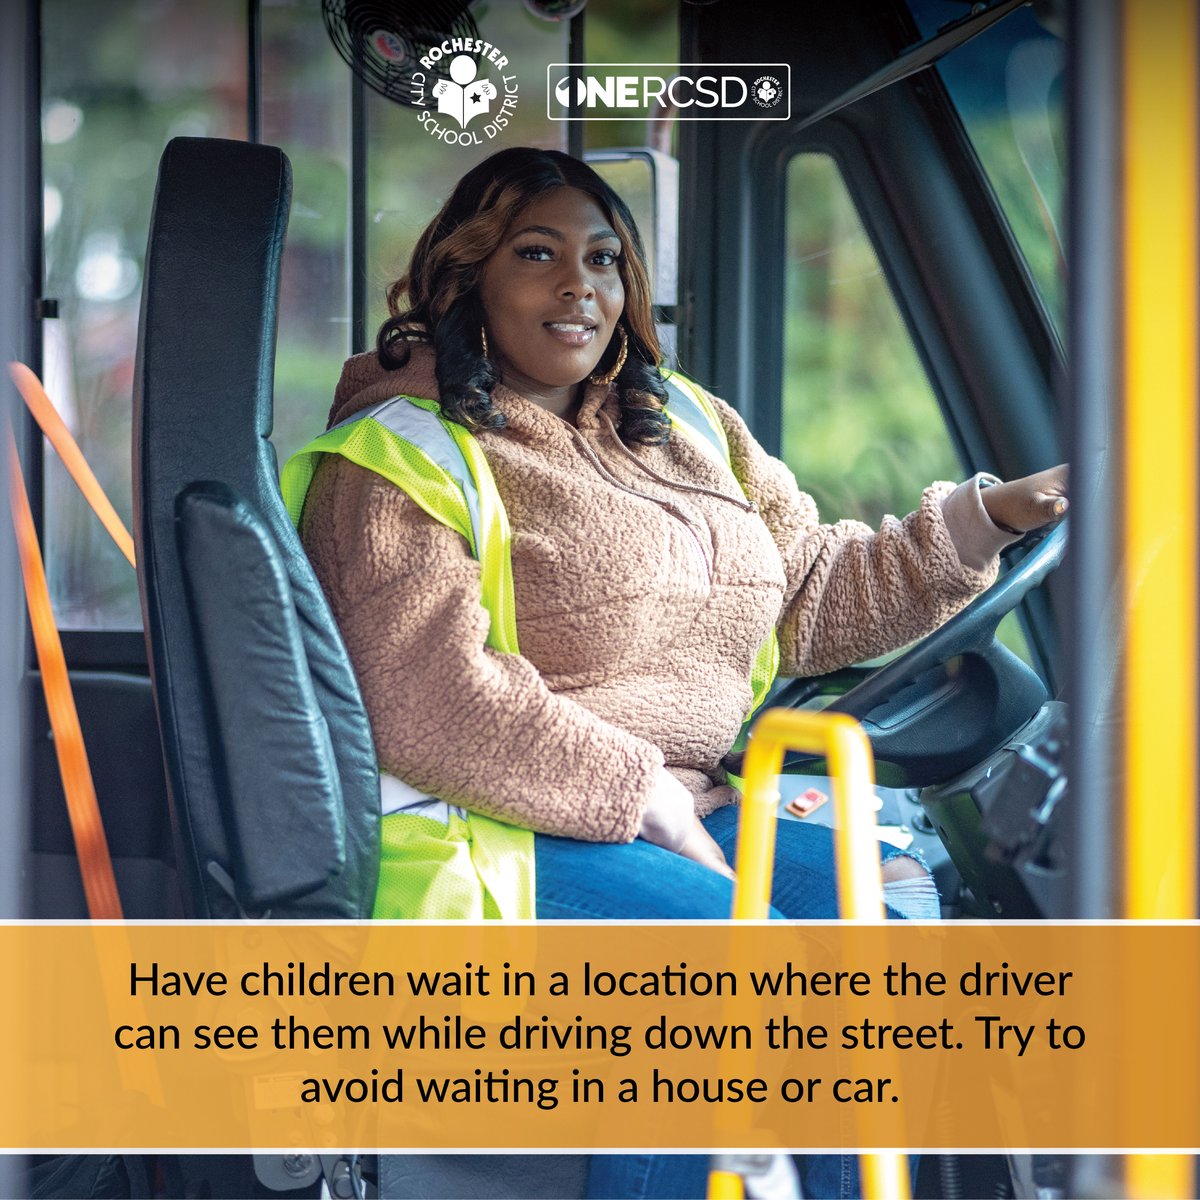 Today is the last day of School Bus Safety Week! Here's our final tip: Have children wait in a location where the driver can see them while driving down the street. Try to avoid waiting in a house or car. #ONERCSD #SchoolBusSafetyWeek